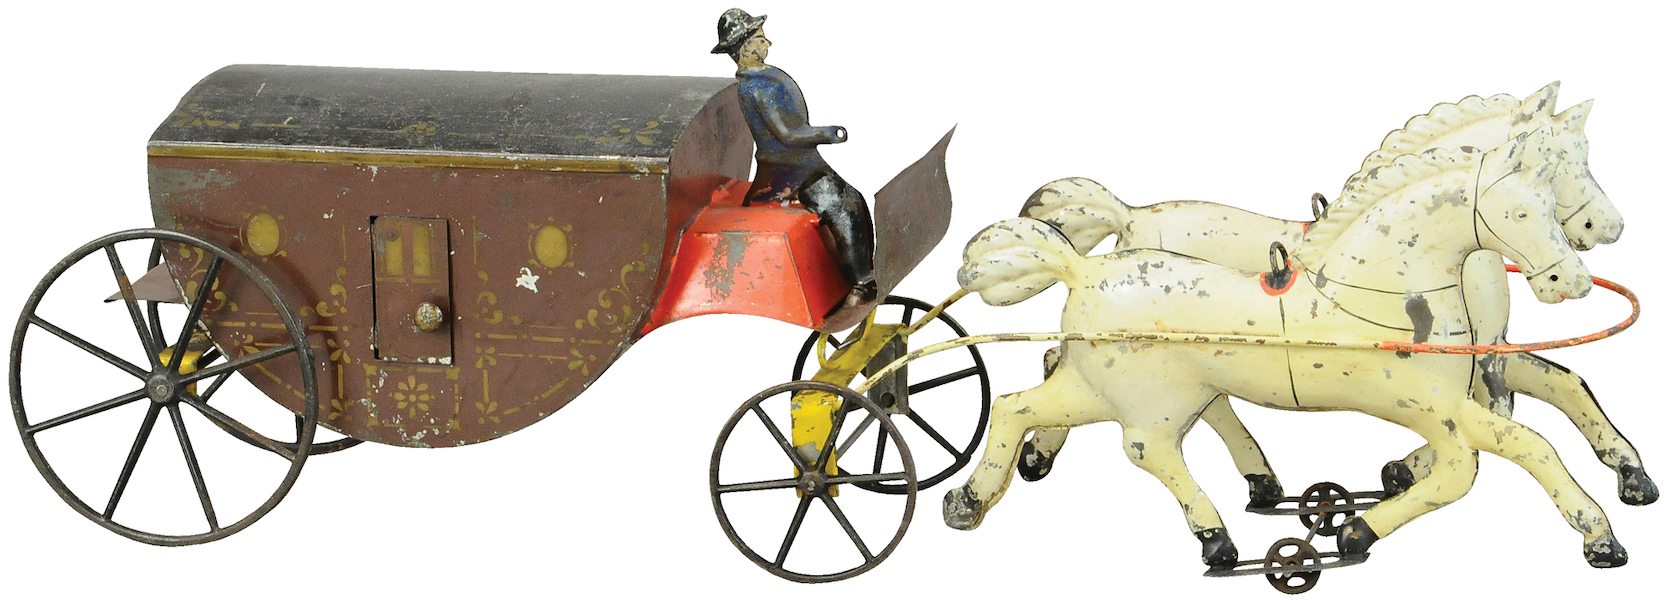 Large Hull & Stafford horse-drawn carriage, 19in long. Sold for $3,600